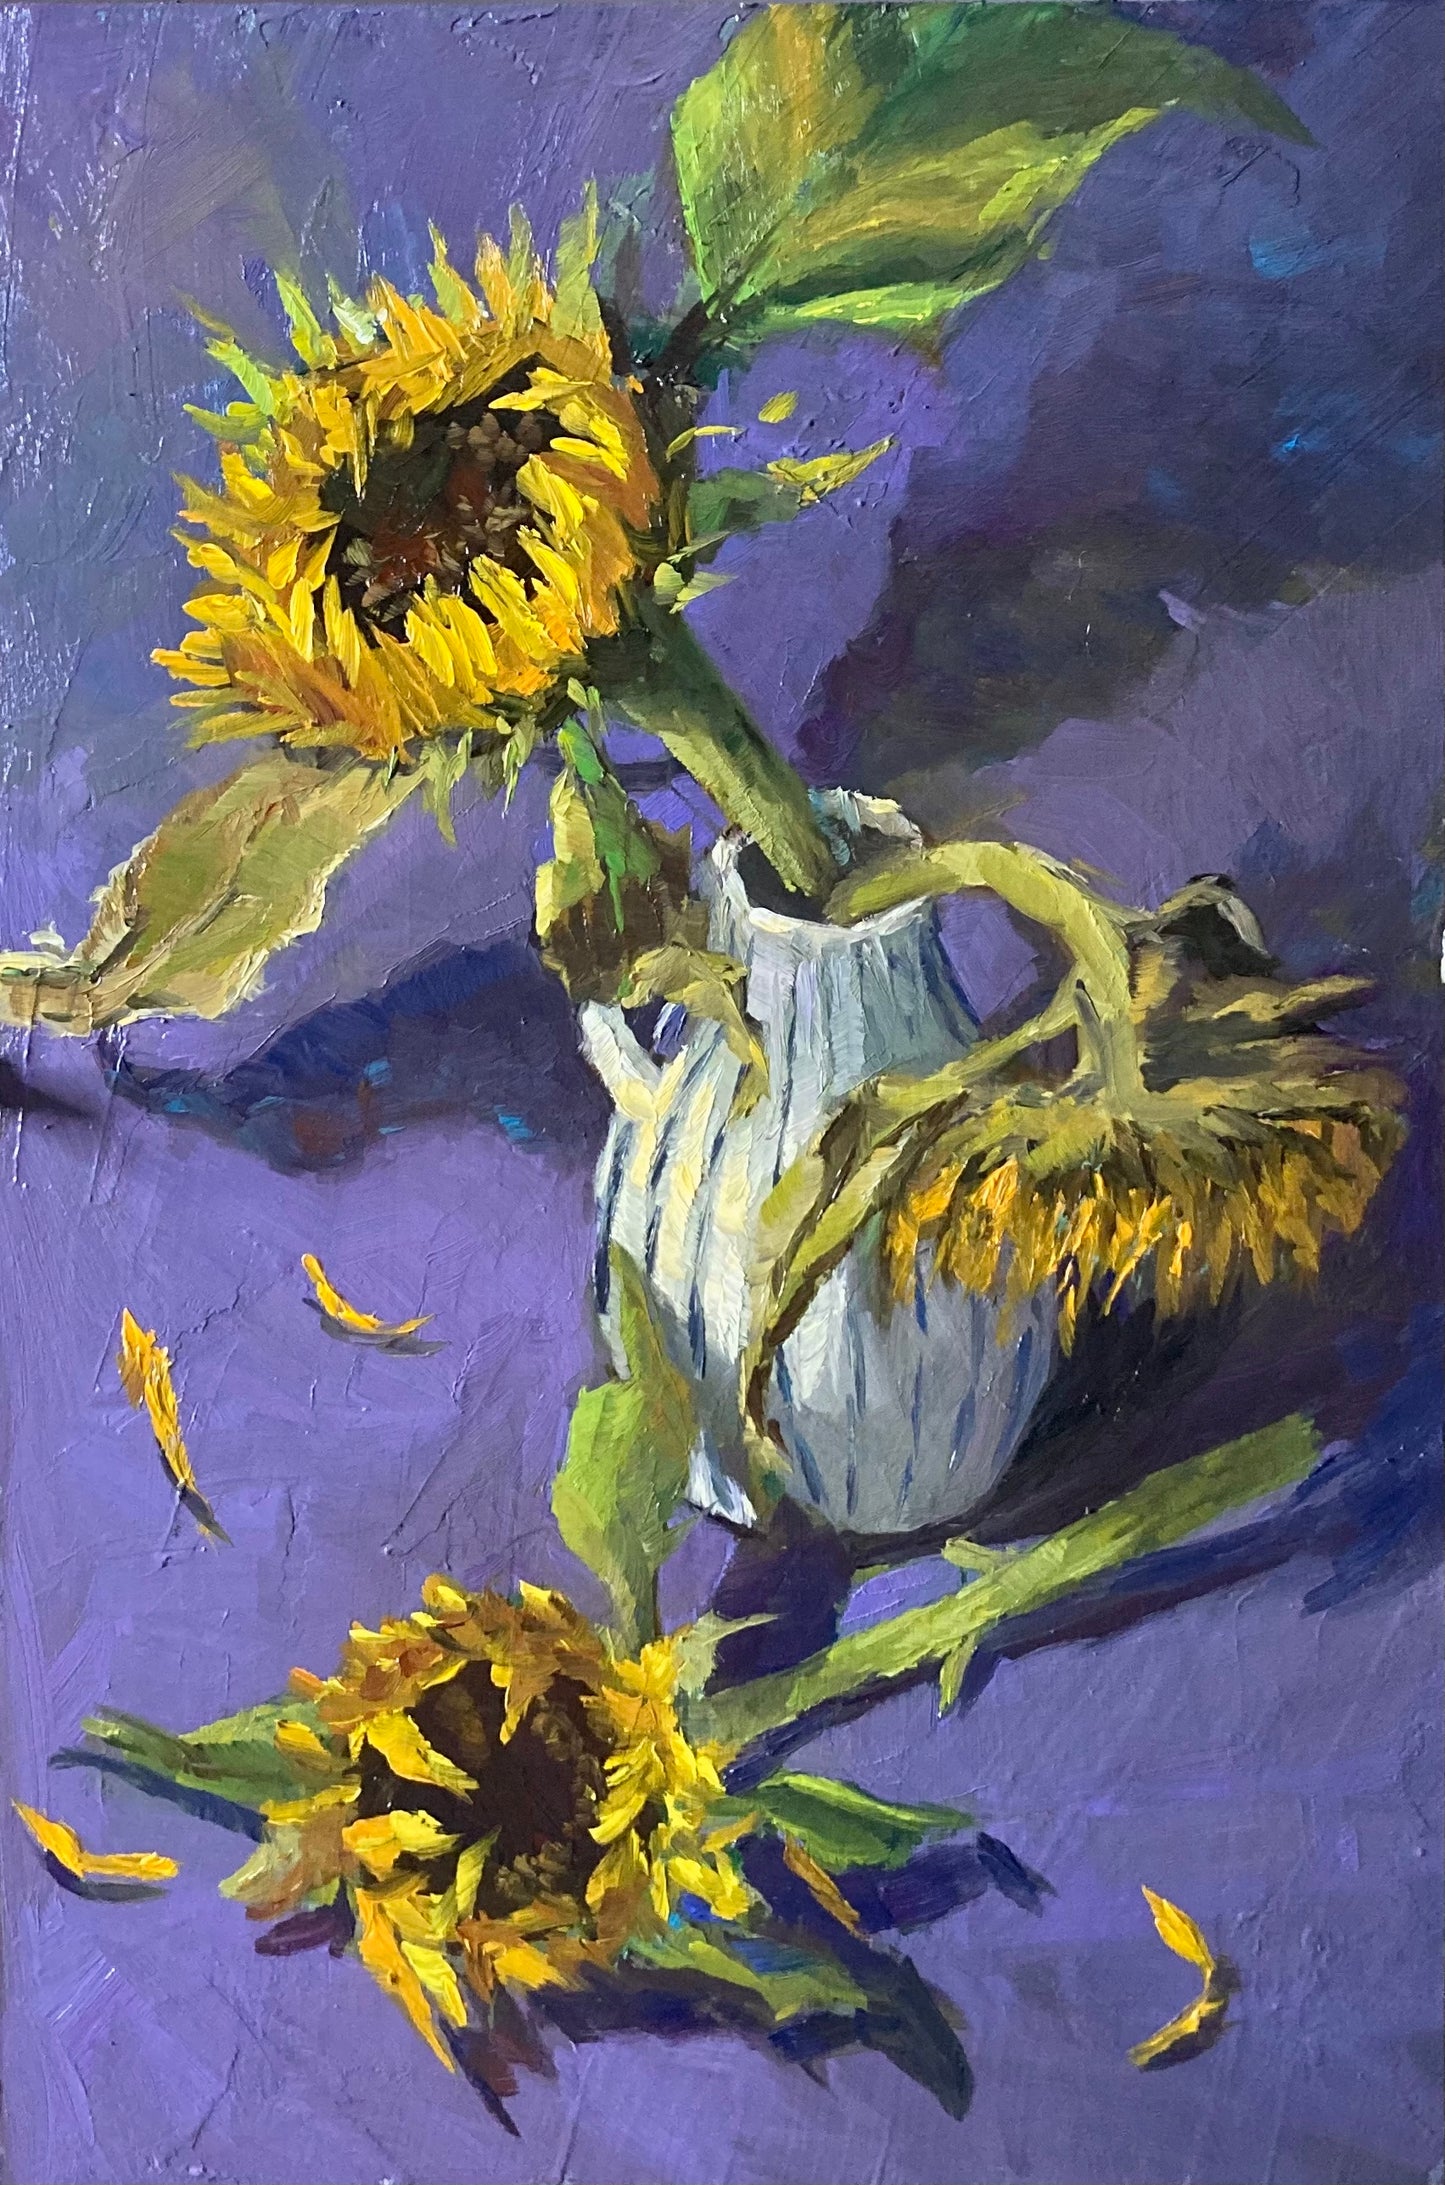 Sunflower Series 26 - Original Stilllife Painting, 8 by 12 inches